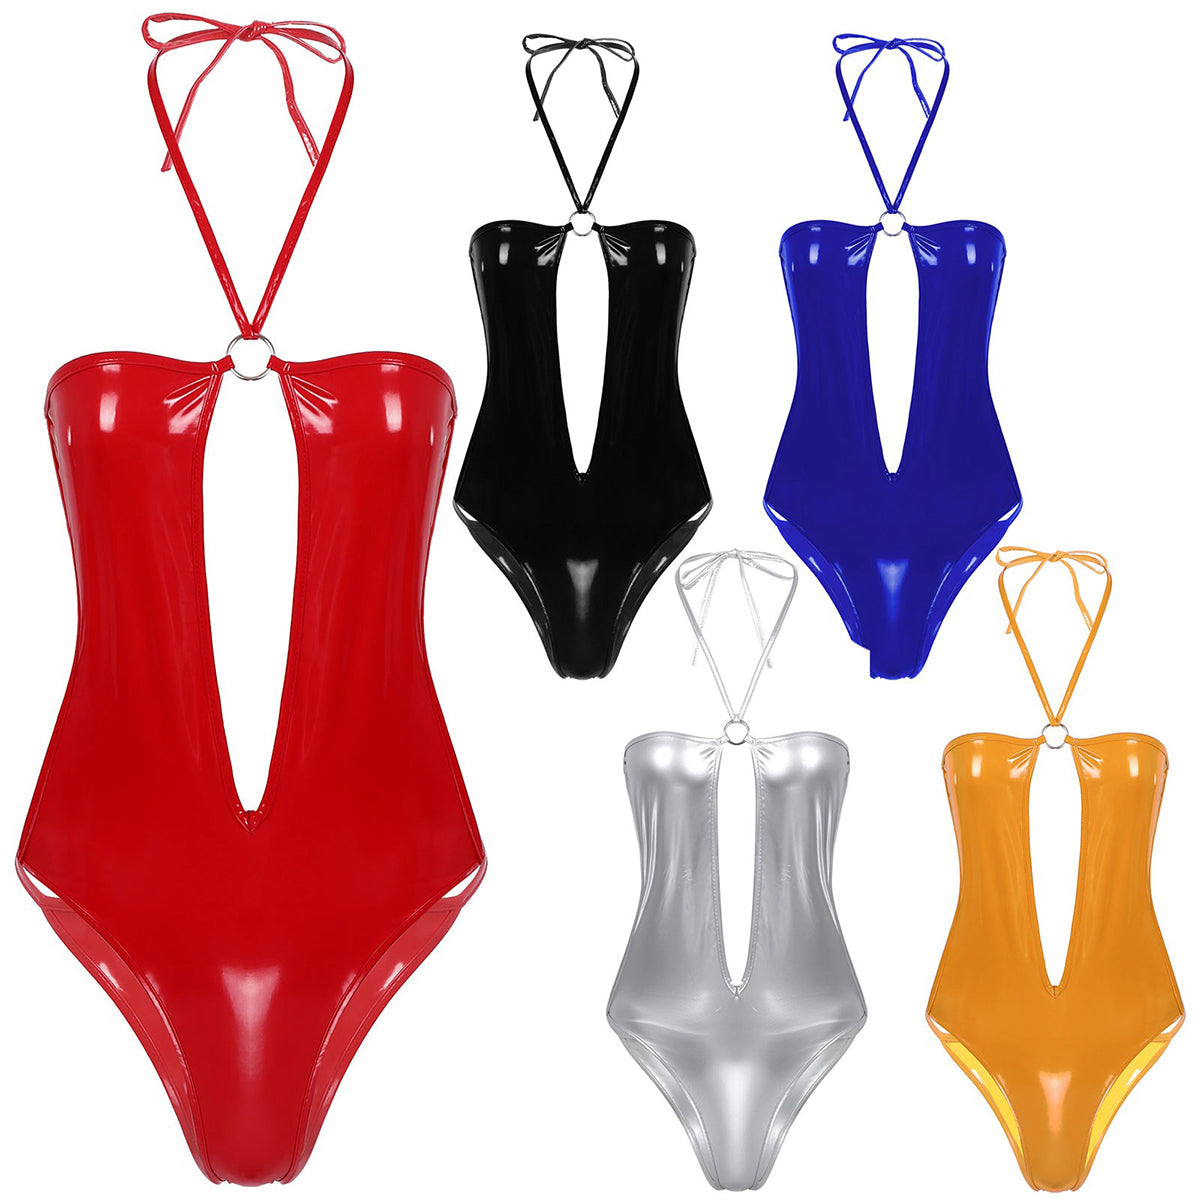 Sexy Shiny Patent Leather Hollow Out Women's Bodysuit / High Cut Wet Look Lingerie / Halter Leotard - HARD'N'HEAVY